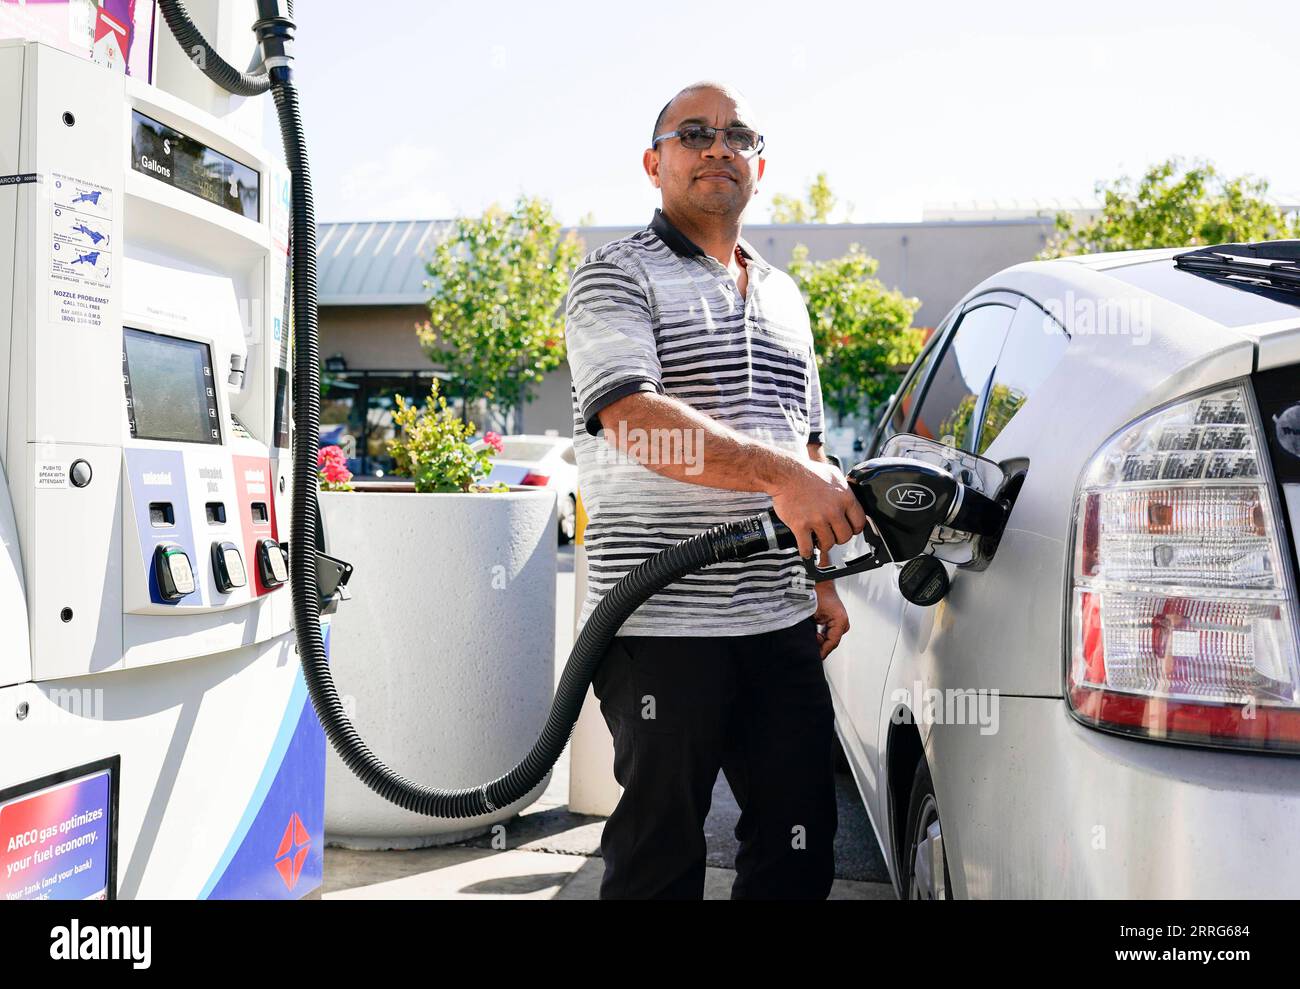 220511 -- MILLBRAE, May 11, 2022 -- A man pumps gasoline into his car at a gas station in Millbrae, California, the United States, May 10, 2022. The national average prices for regular gasoline and diesel in the United States both climbed to fresh record highs Tuesday. According to the American Automobile Association AAA, which provides the latest gas price analysis based on data from 130,000 gas stations nationwide, the regular gas price rose four cents on Tuesday to 4.37 U.S. dollars a gallon, overtaking the prior record of 4.33 dollars on March 11. Photo by /Xinhua U.S.-CALIFORNIA-MILLBRAE- Stock Photo